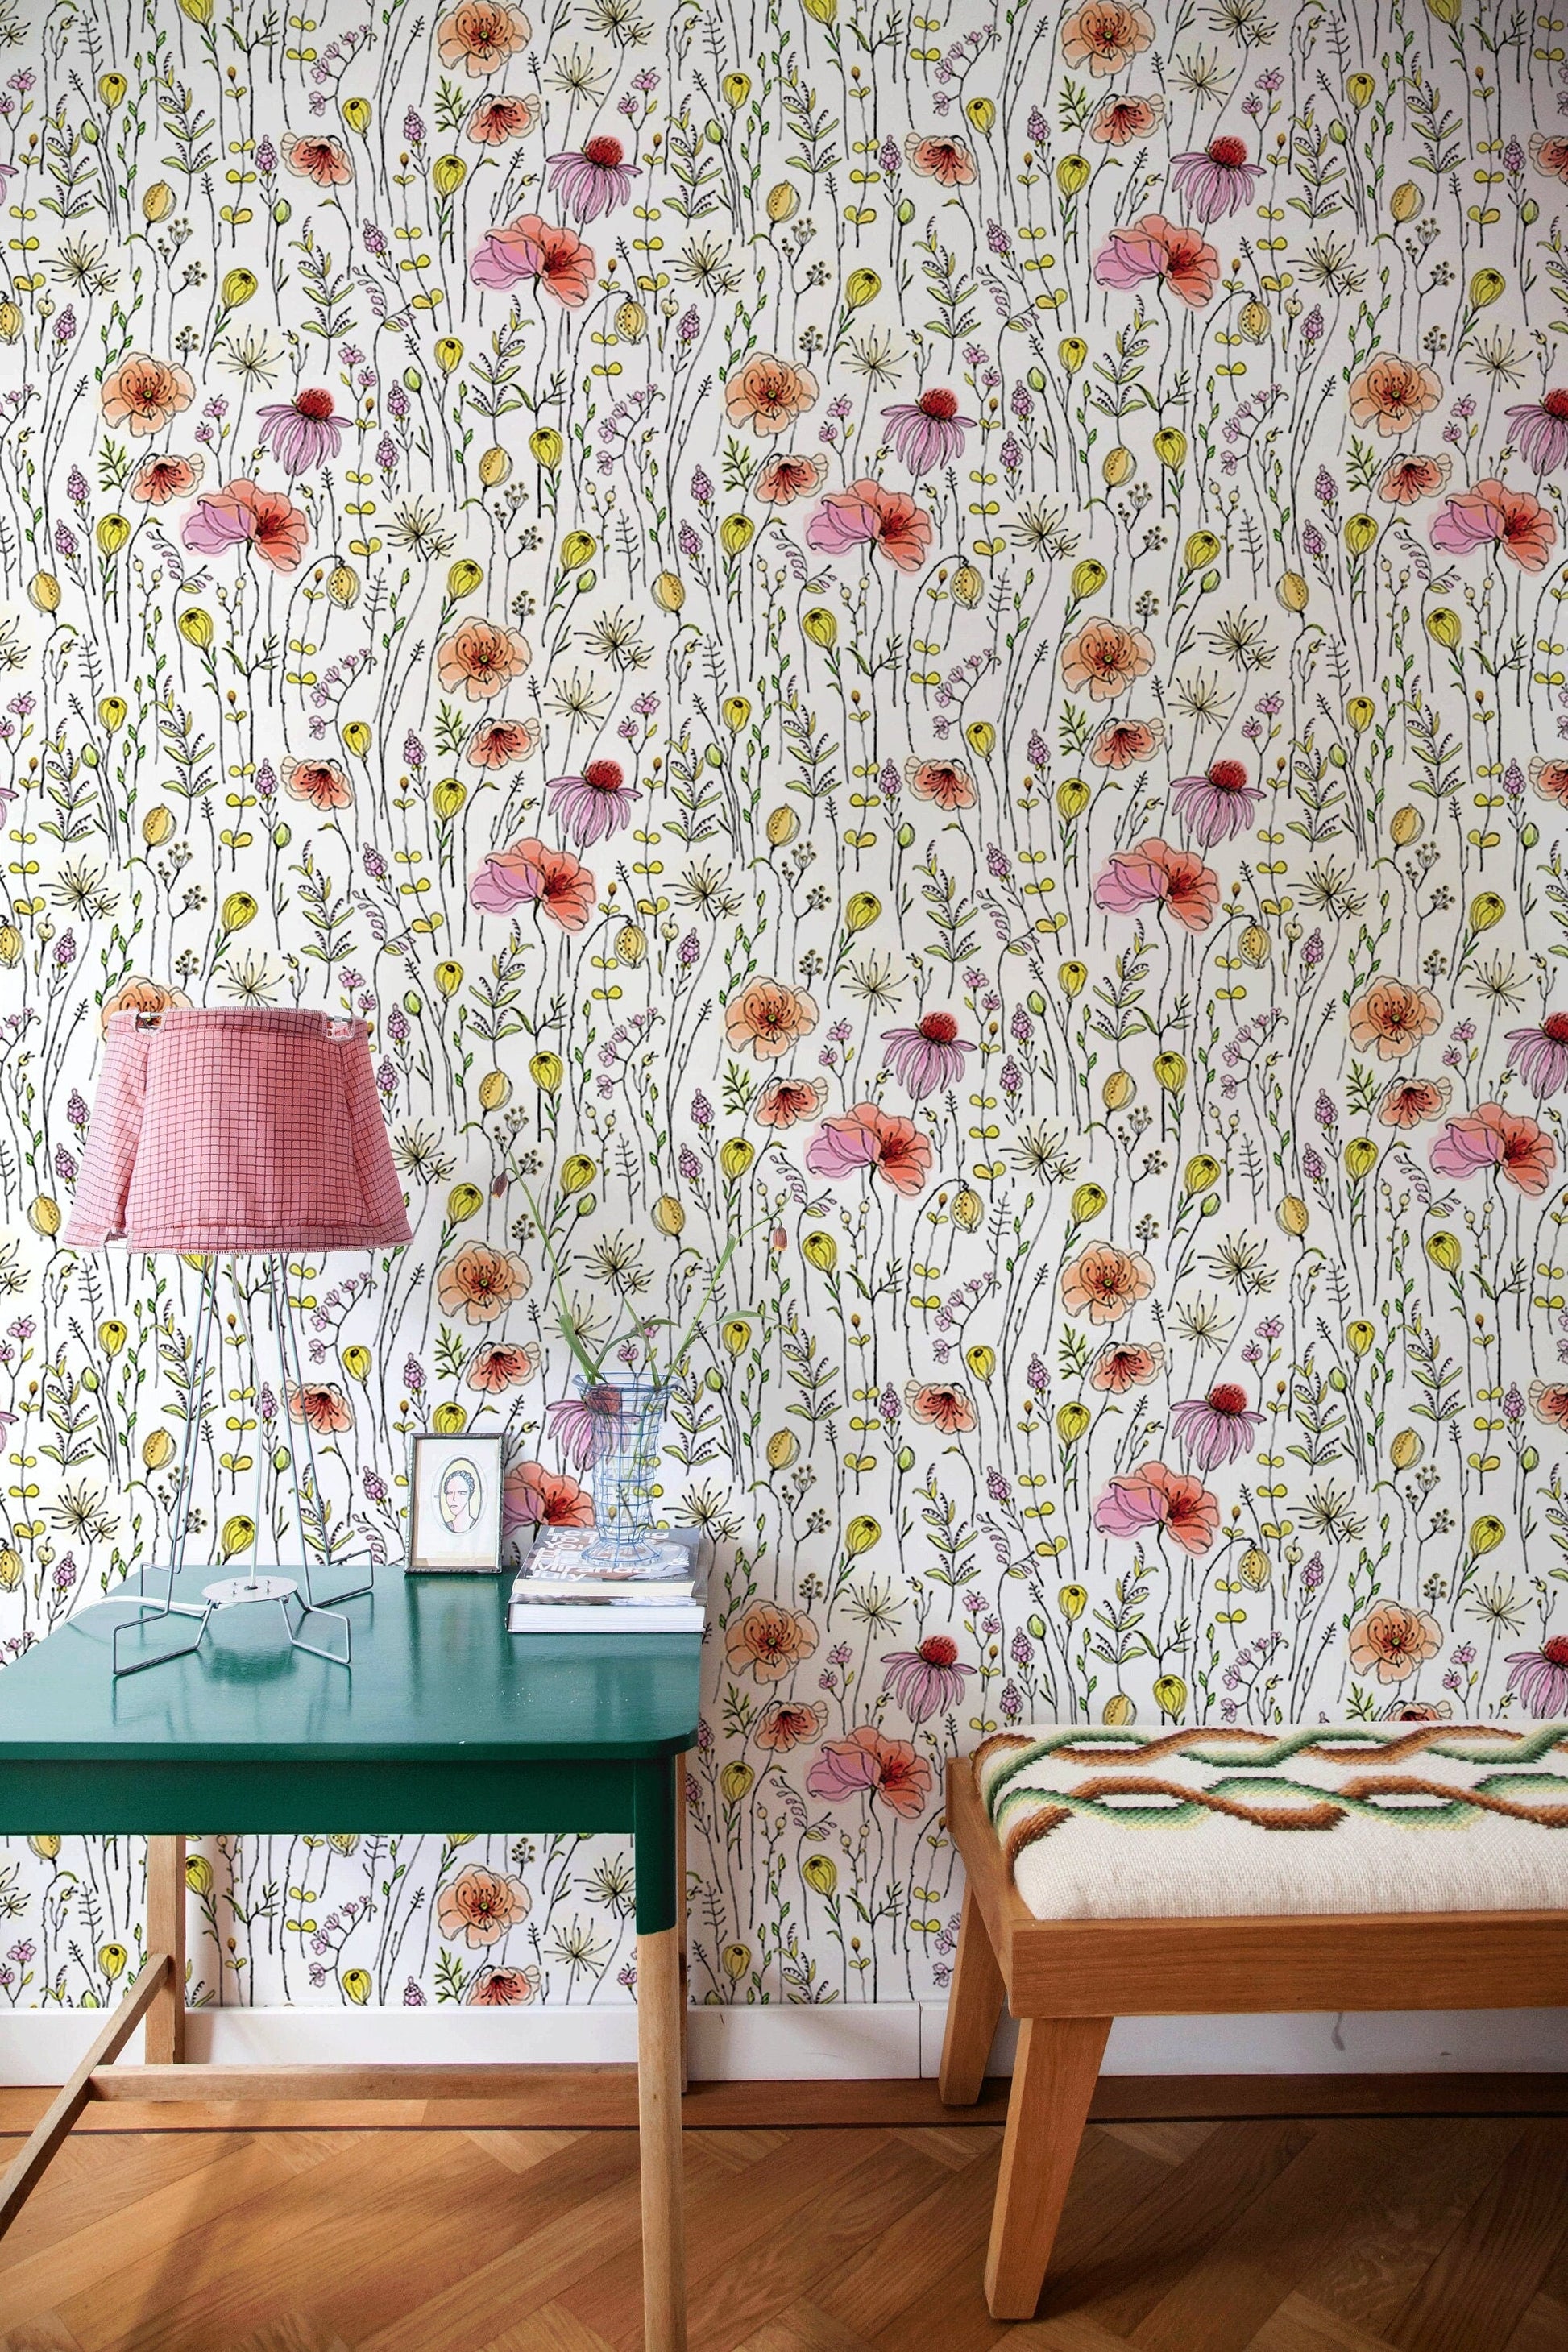 Removable Wallpaper Peel and Stick Wallpaper Wall Paper Wall Mural - Vintage Floral Wallpaper - B018